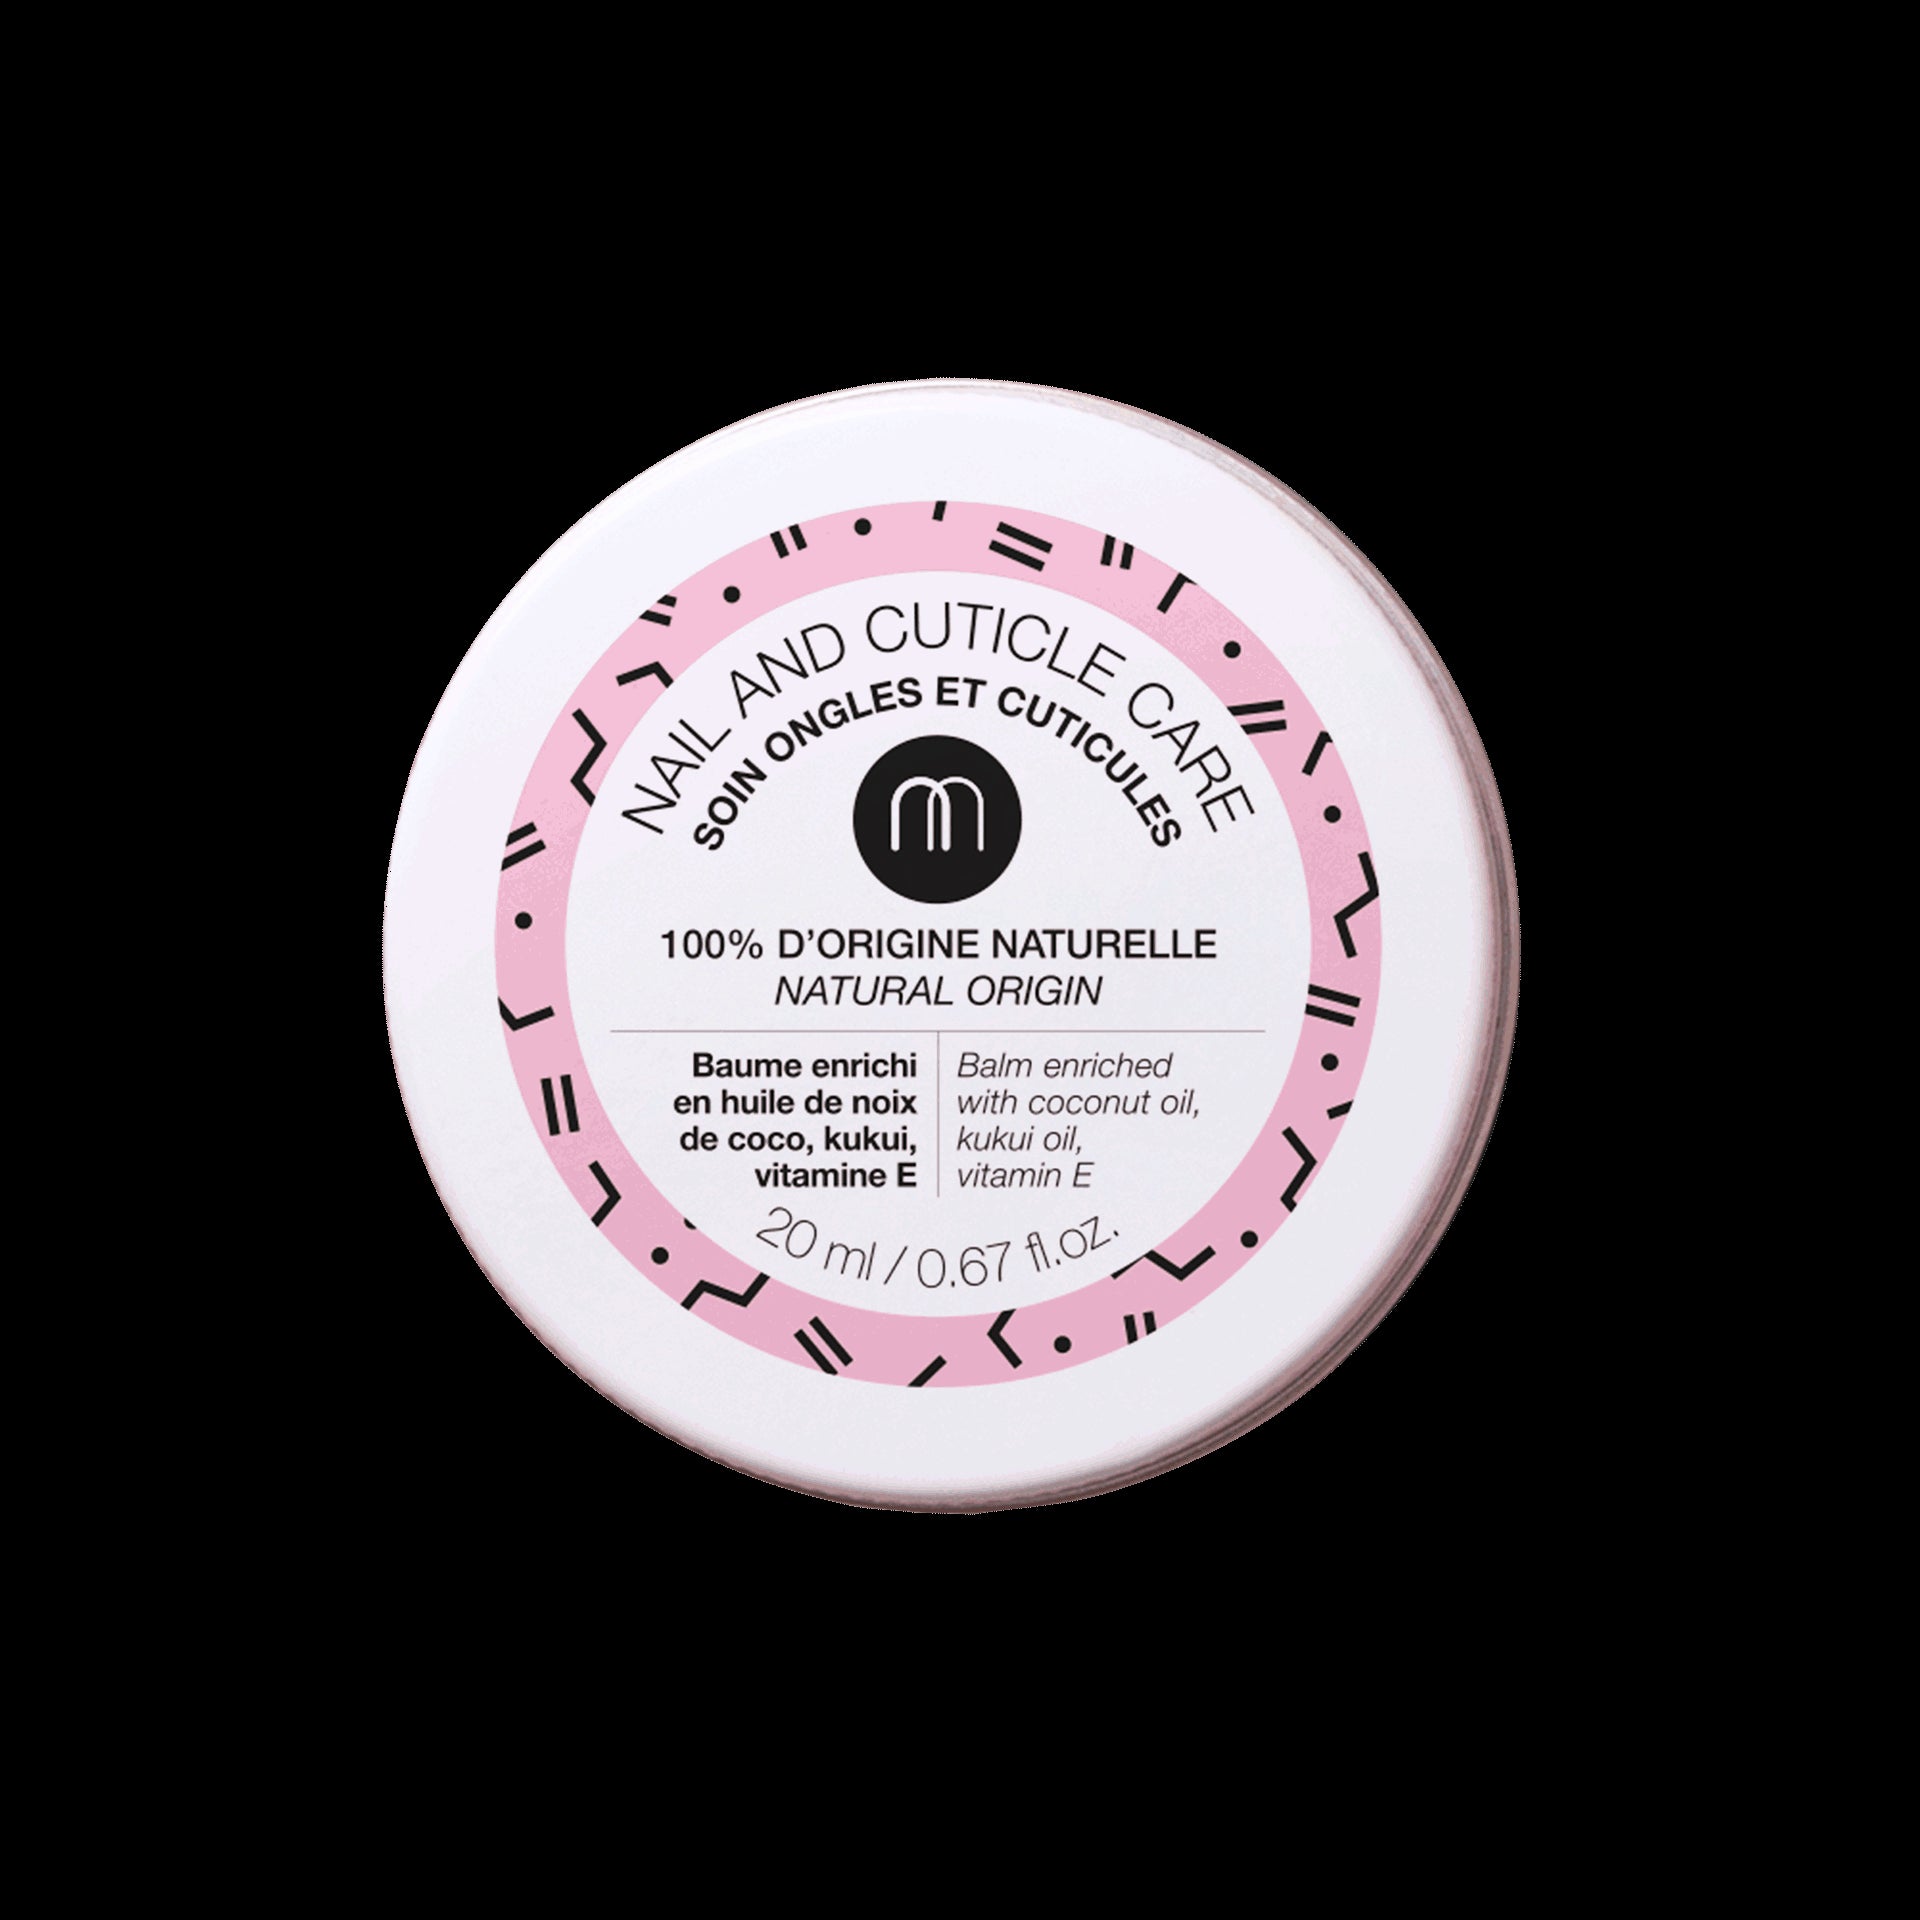 nail and cuticle care packaging